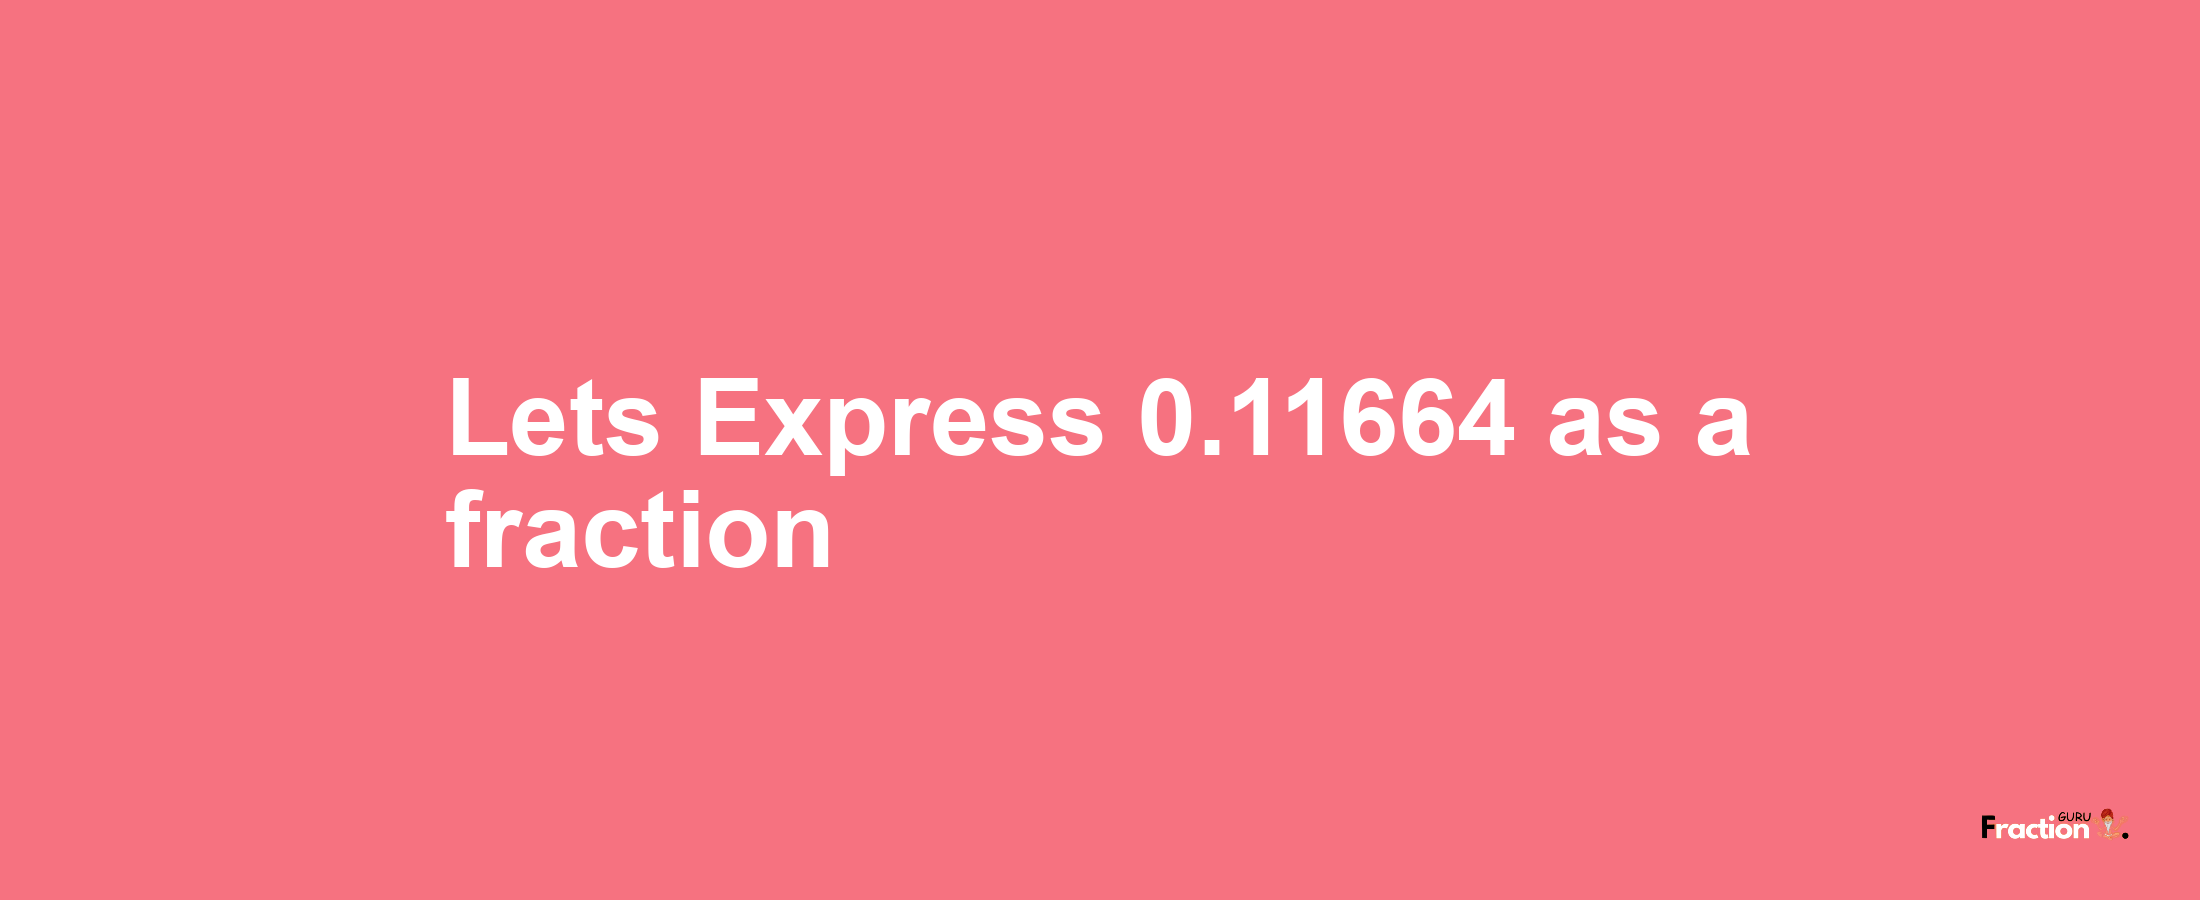 Lets Express 0.11664 as afraction